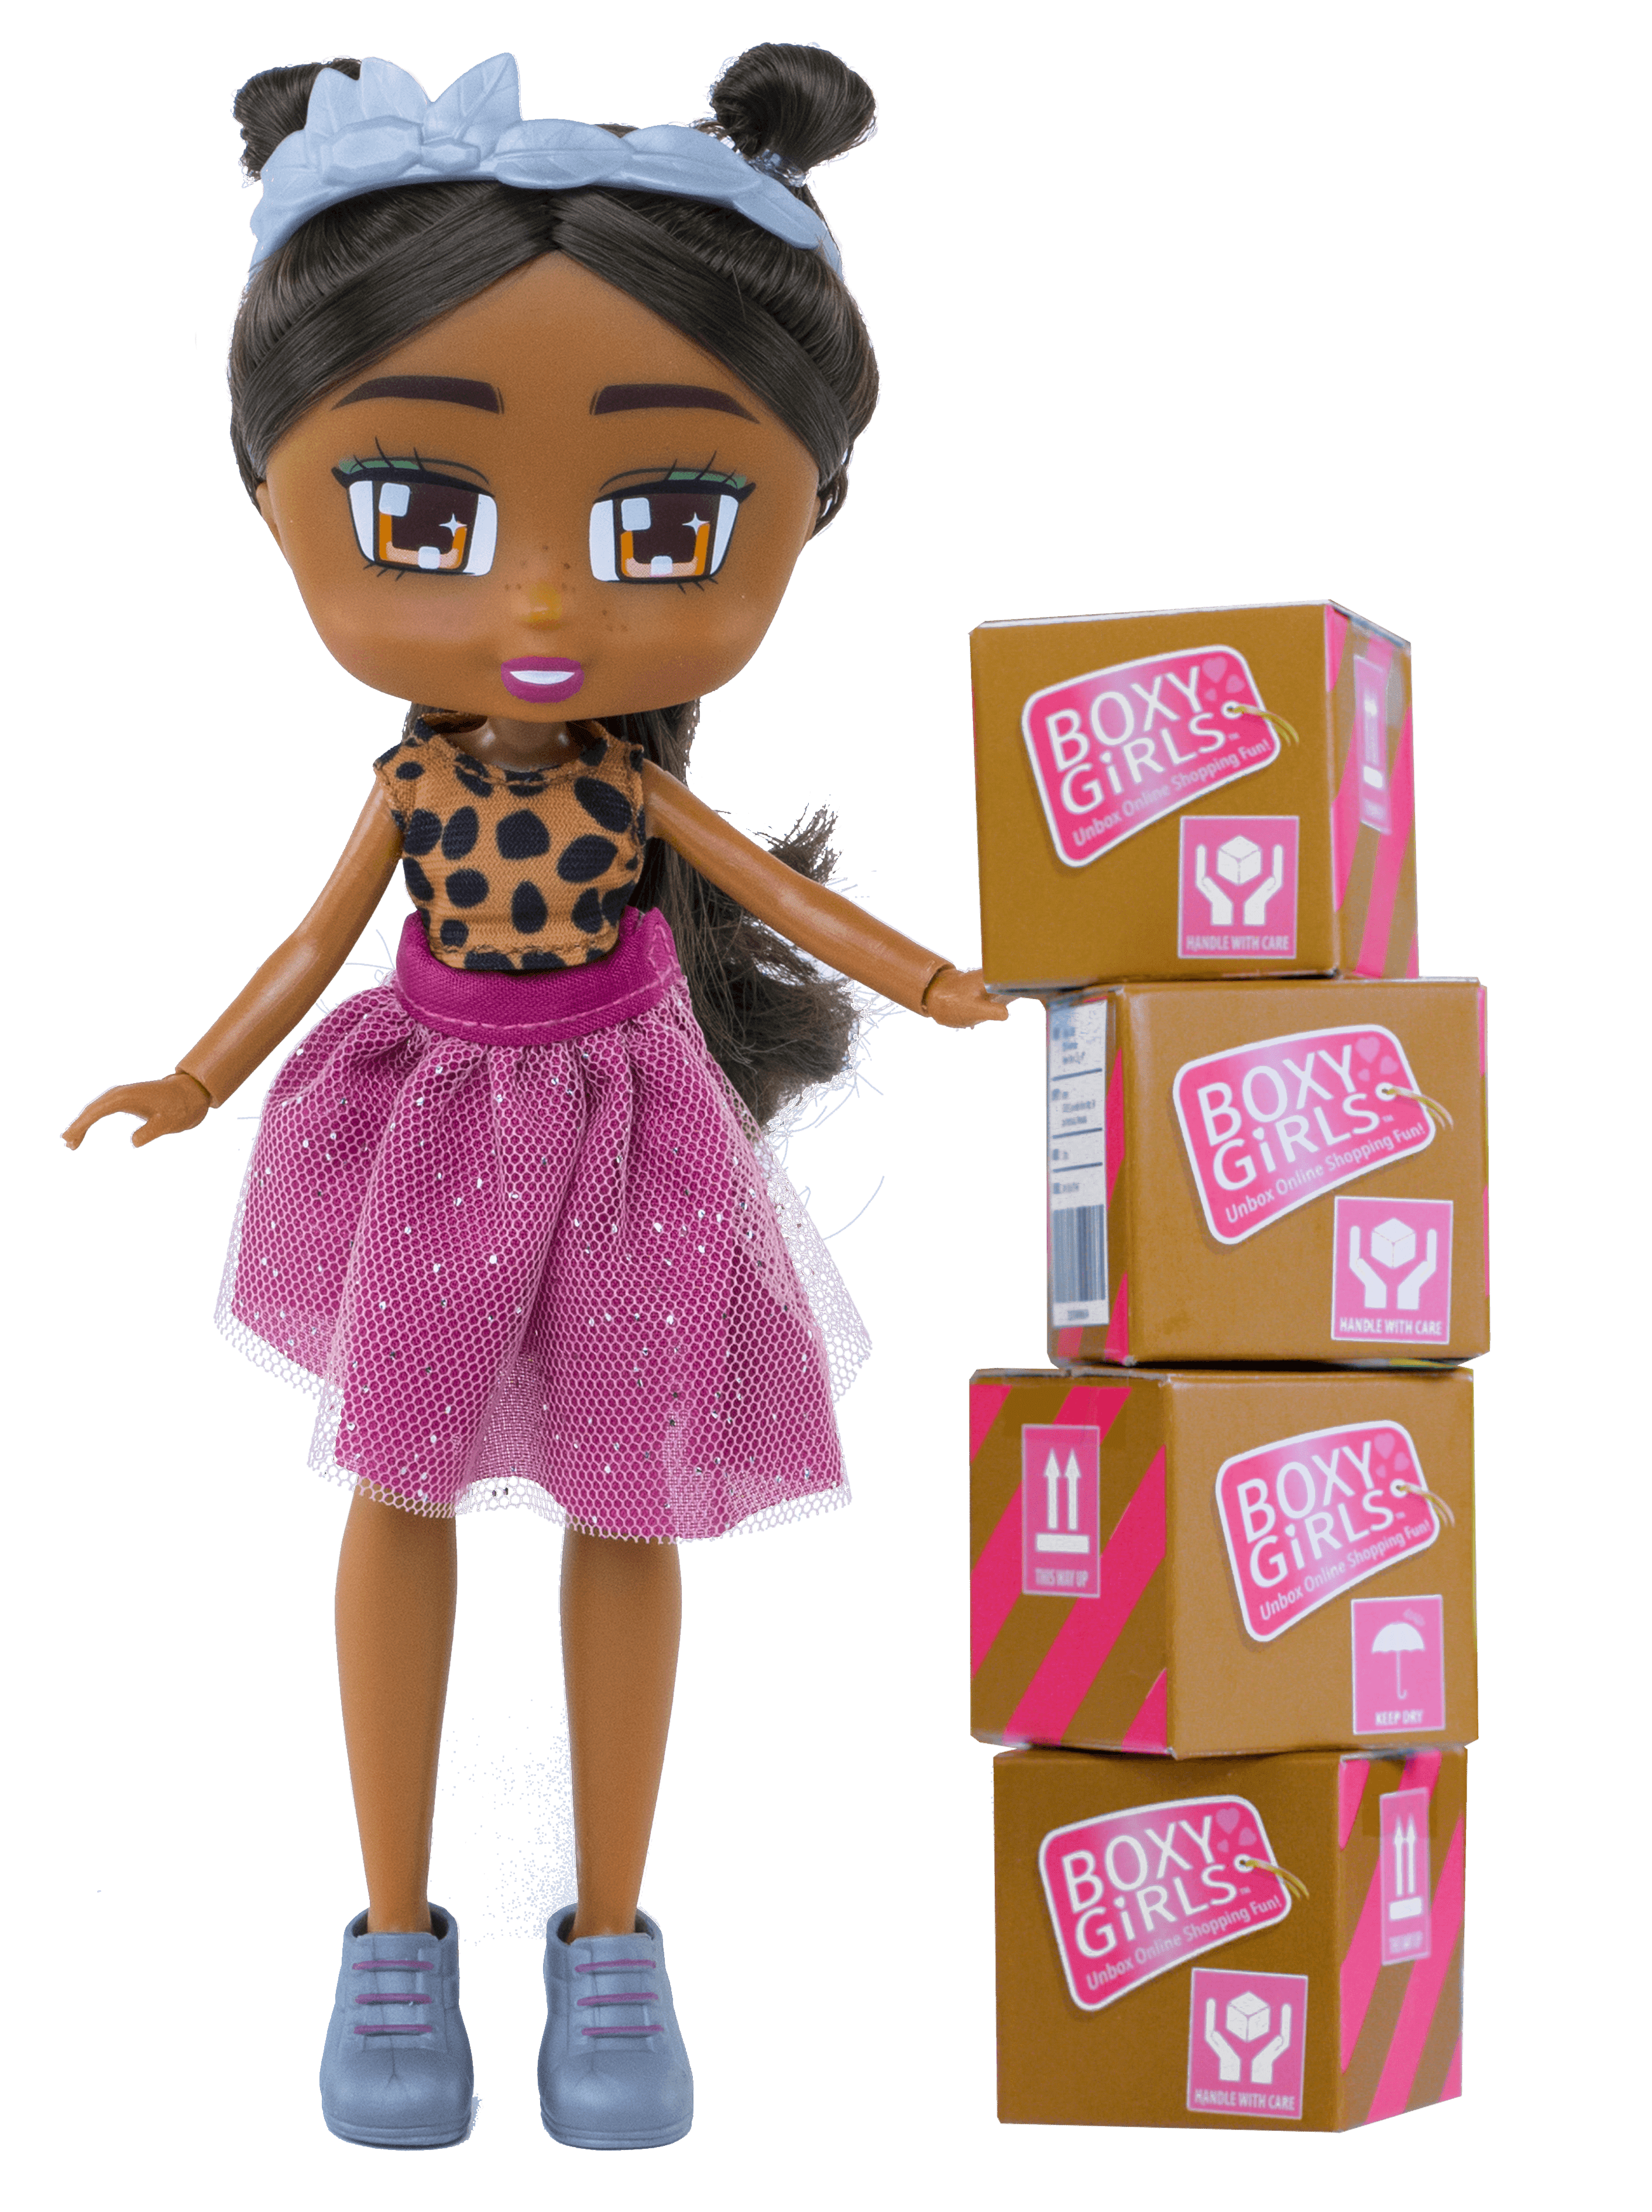 Details about   New Nomi Boxy Girl Fashion Dolls W/ Accessory Surprise Boxes